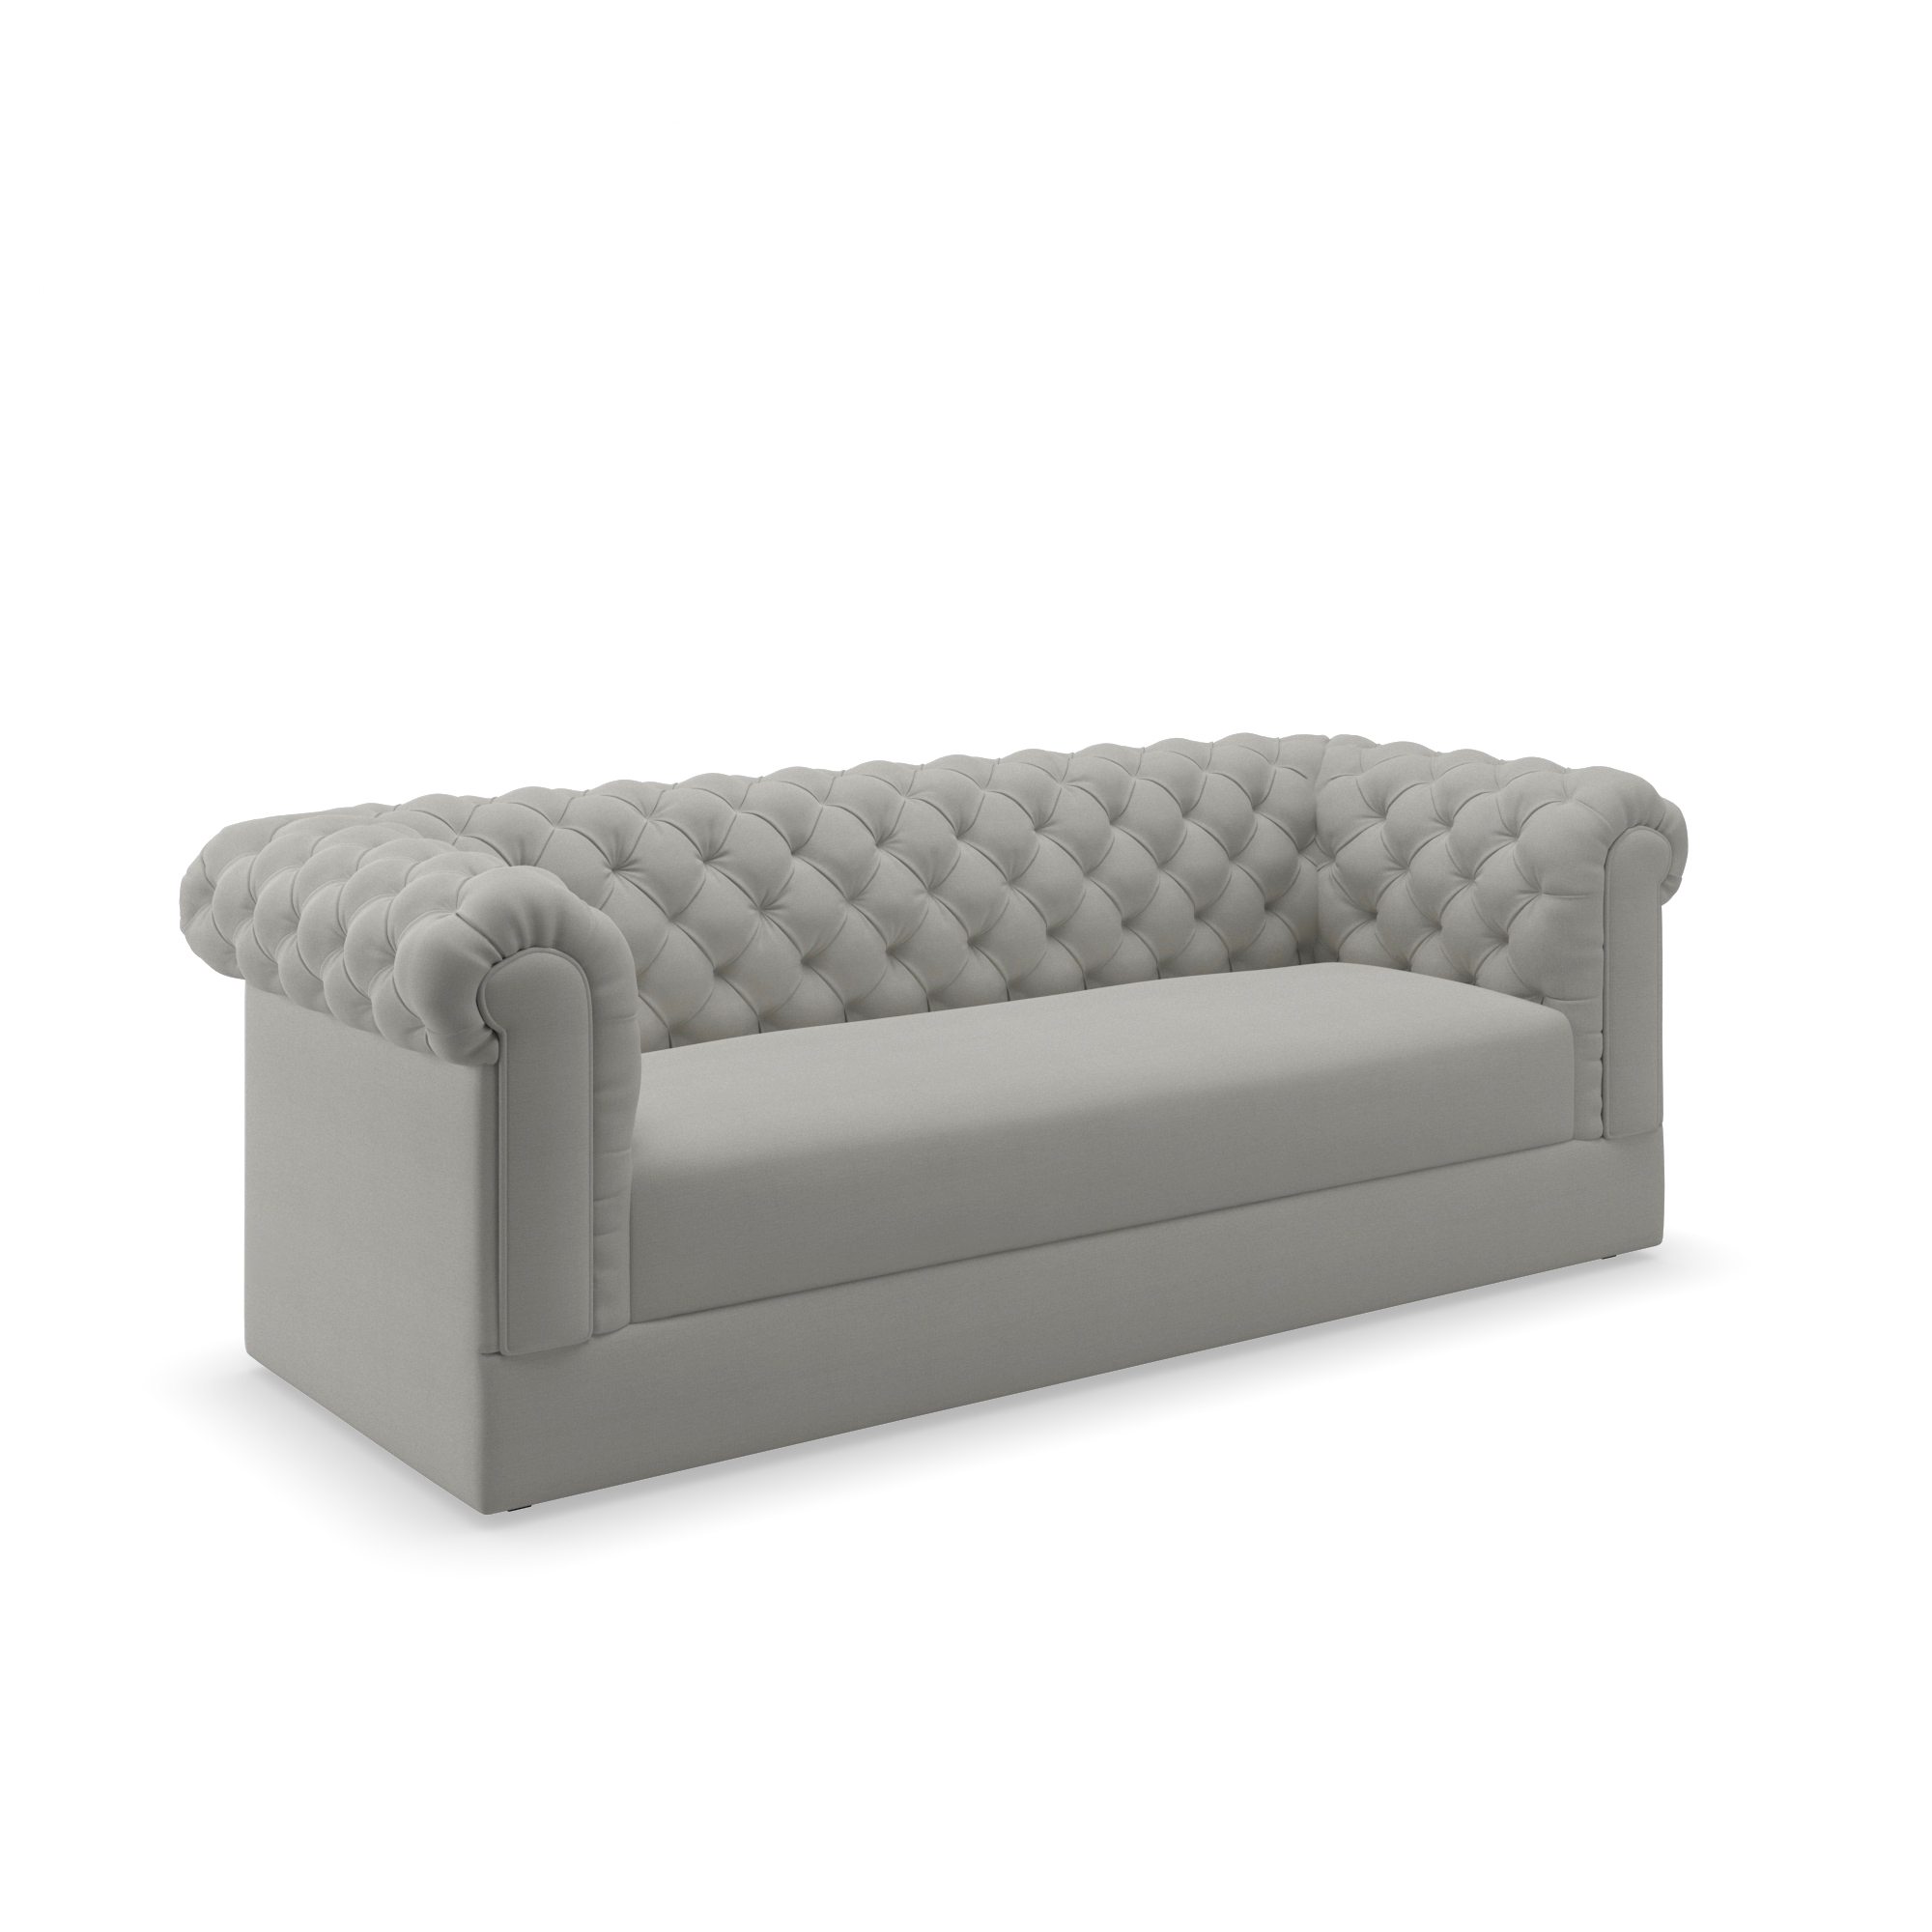 Westchester diamond tufted french roll commercial sofa gray